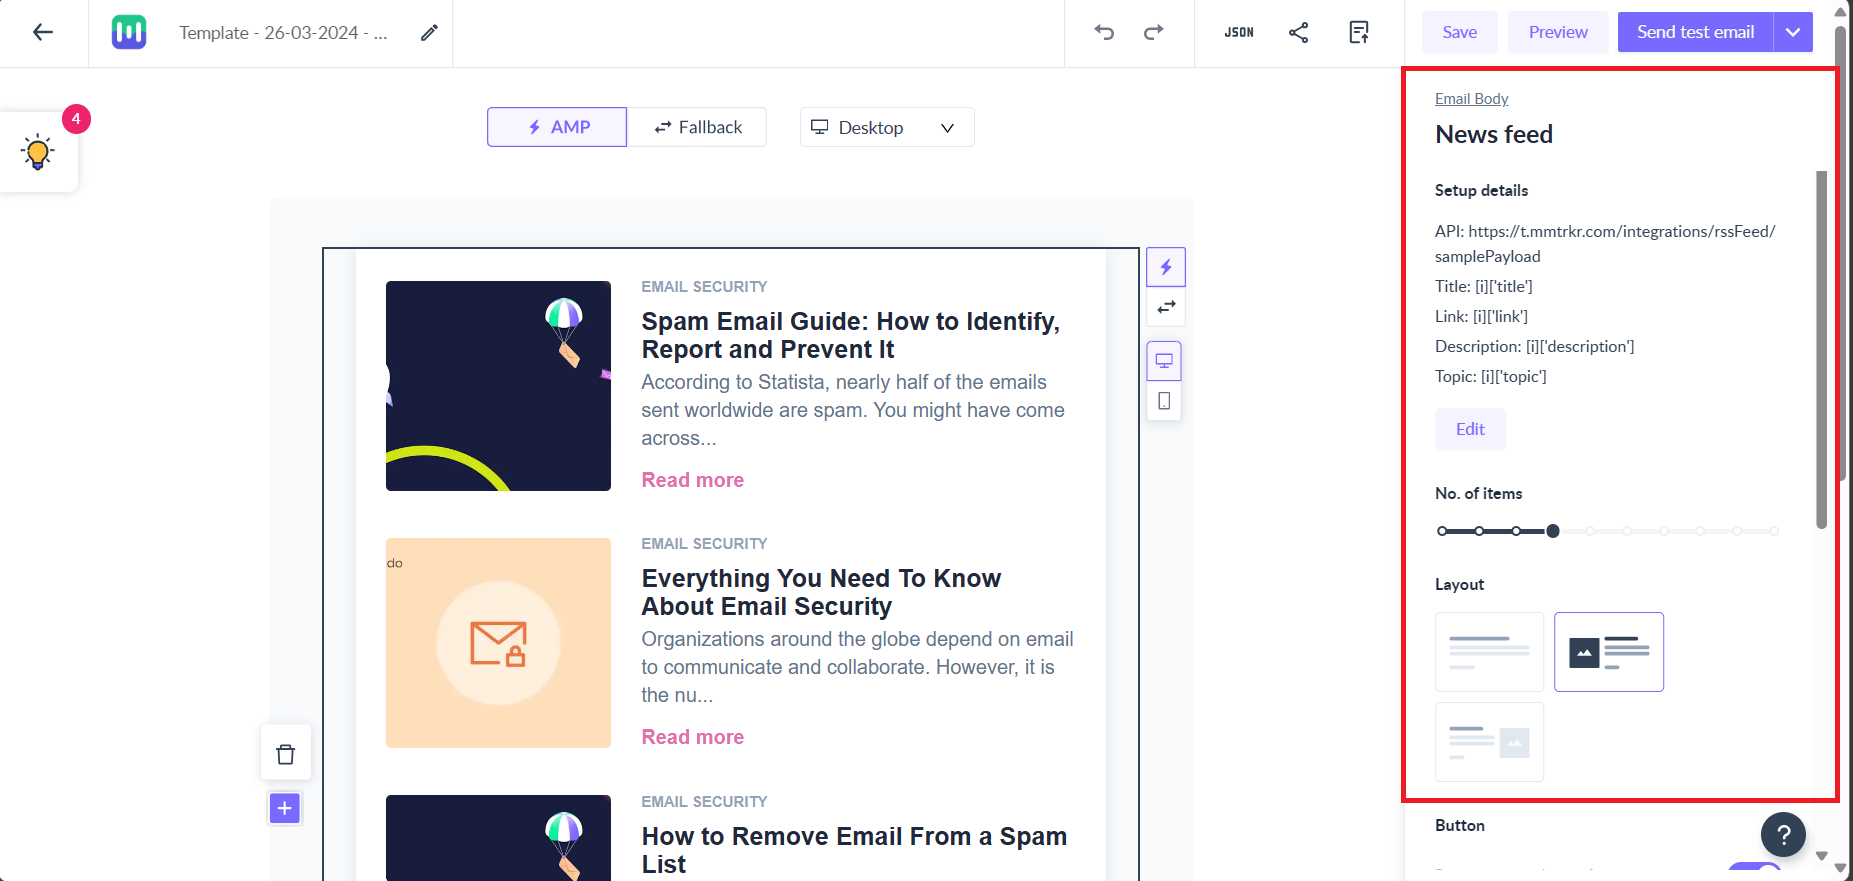 How to add a News Feed widget to your email template?